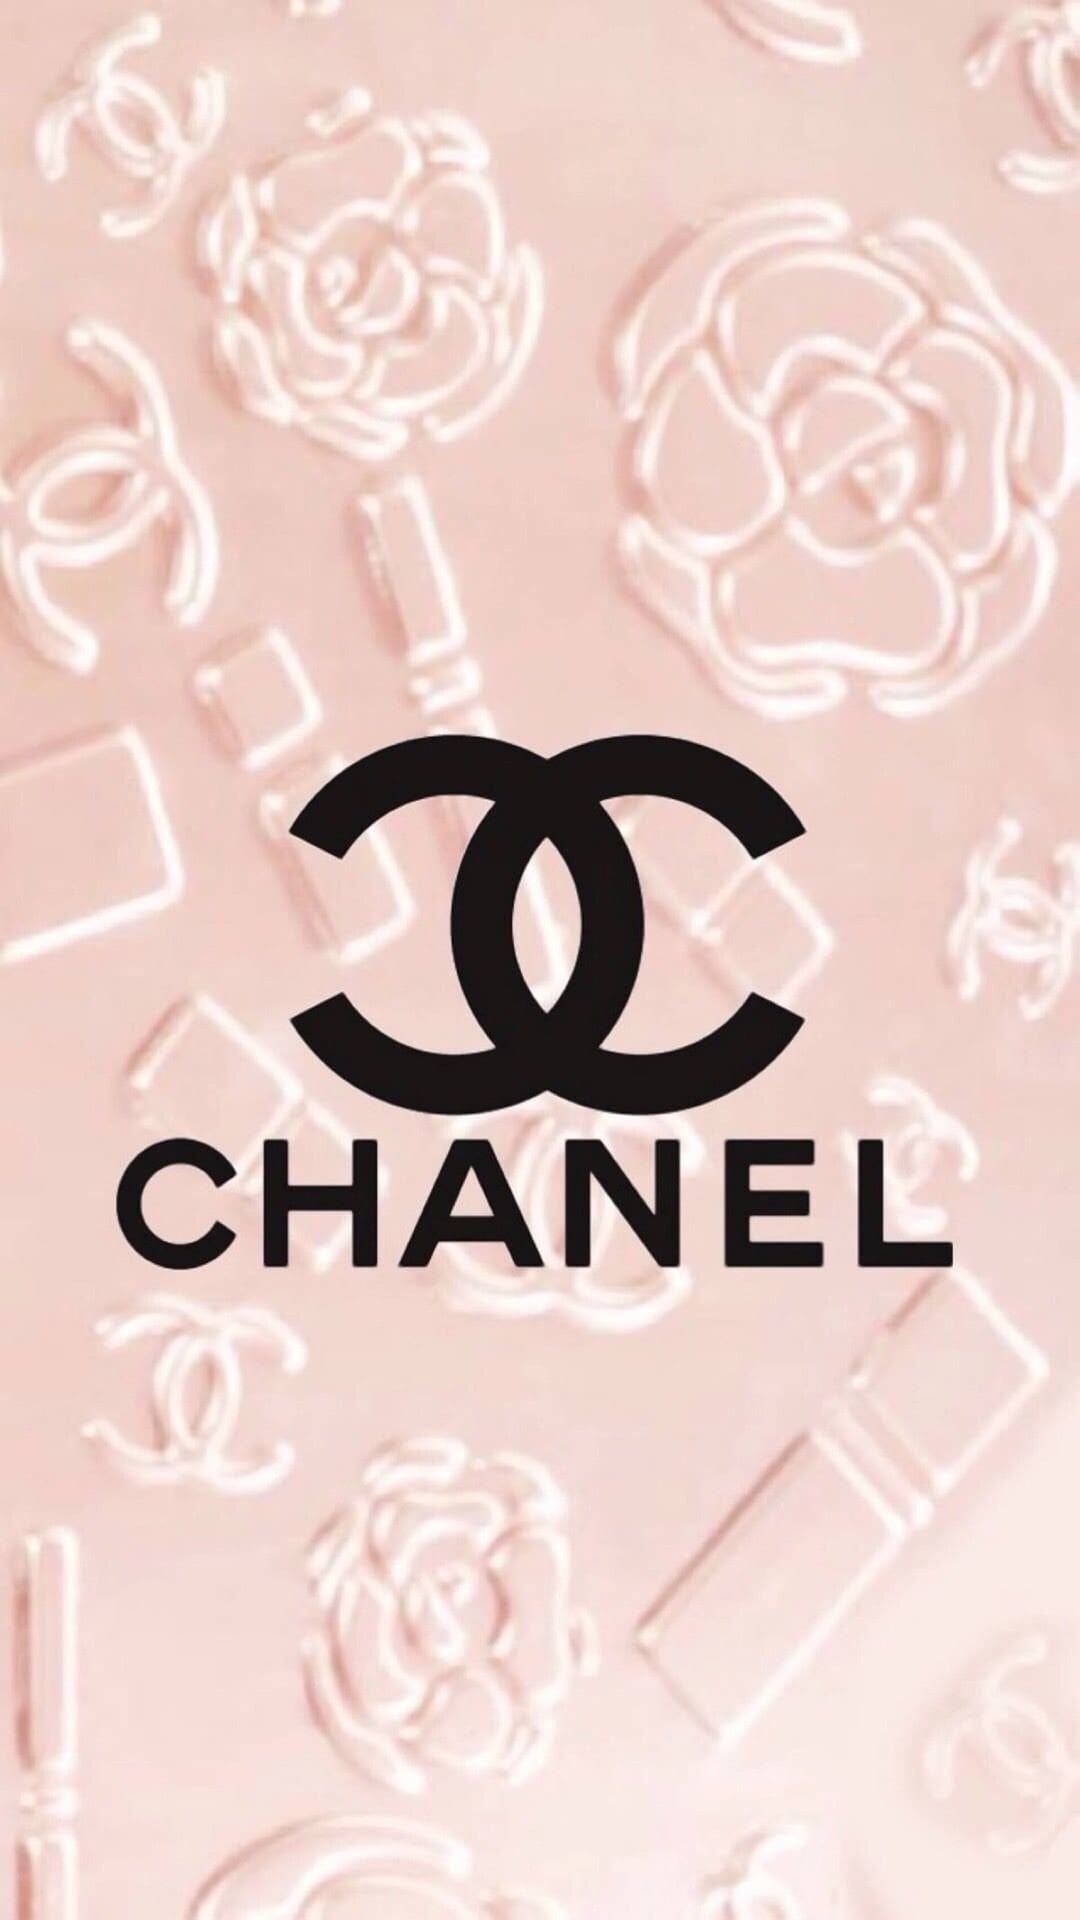 Chanel: Logo, Made up of two interlocking C’s in opposite directions. 1080x1920 Full HD Background.